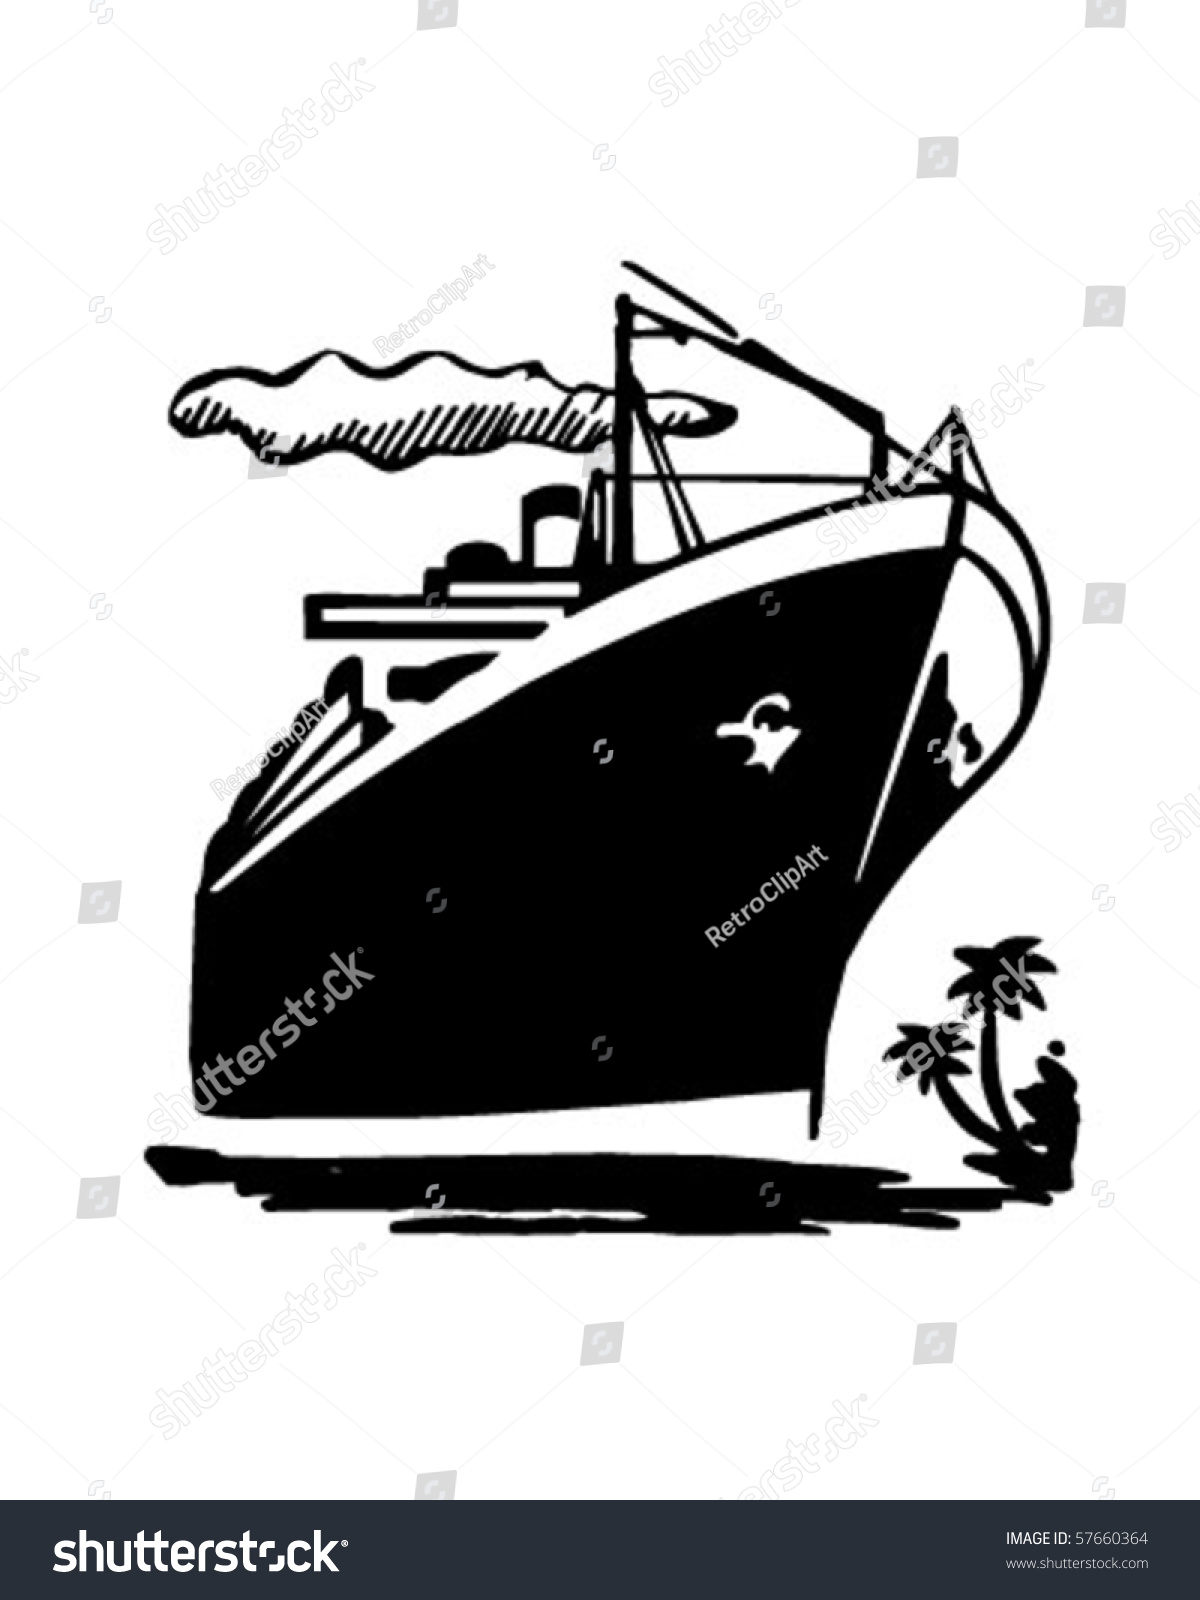 queen mary clipart - photo #35